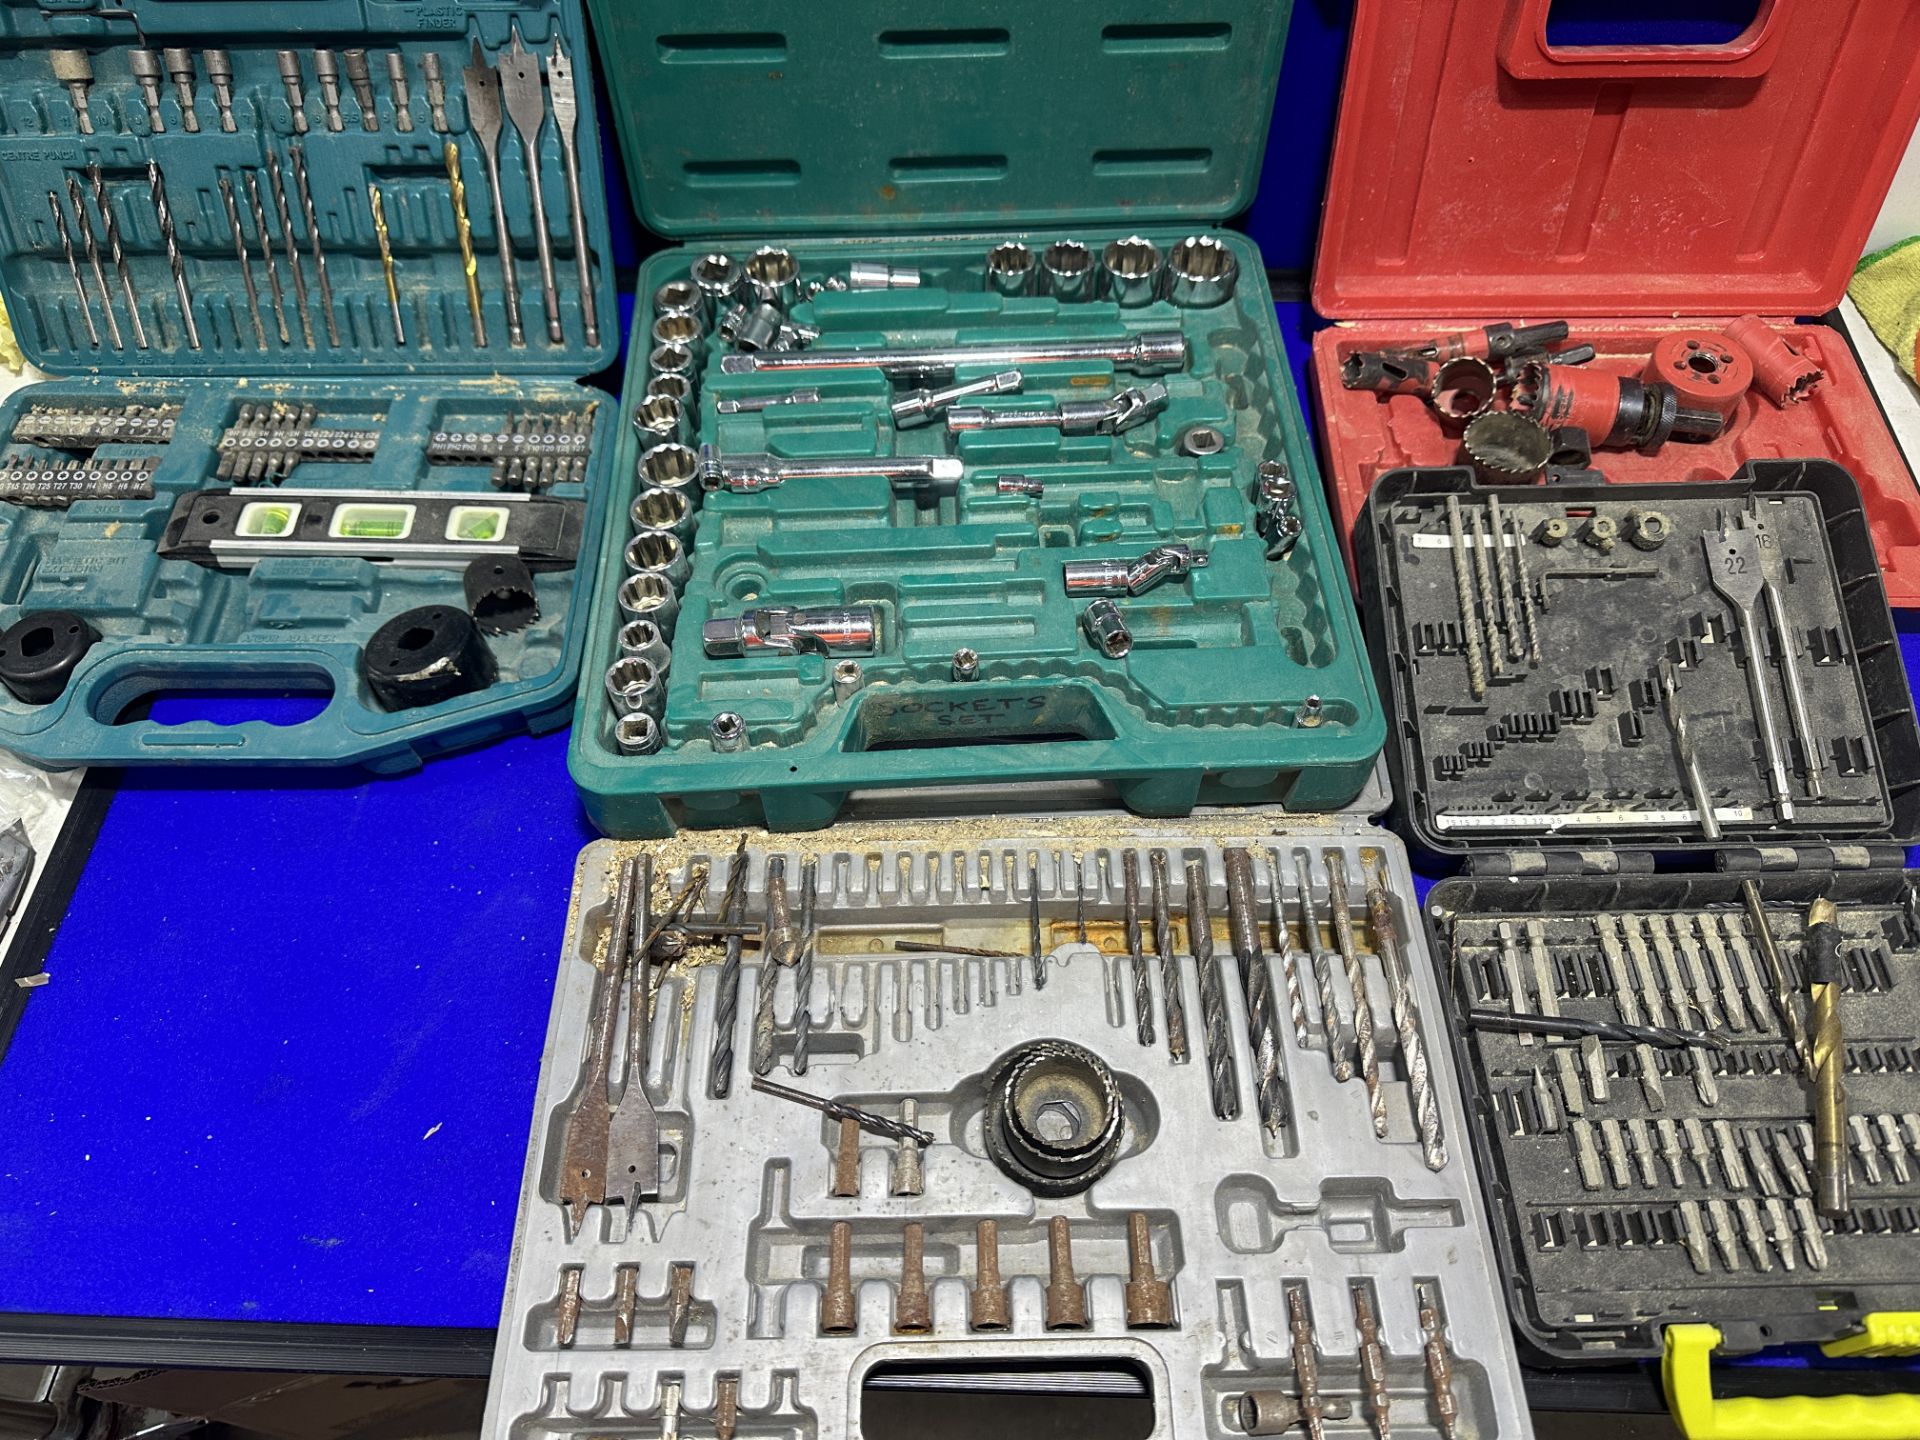 5 x Various tool cases with contents